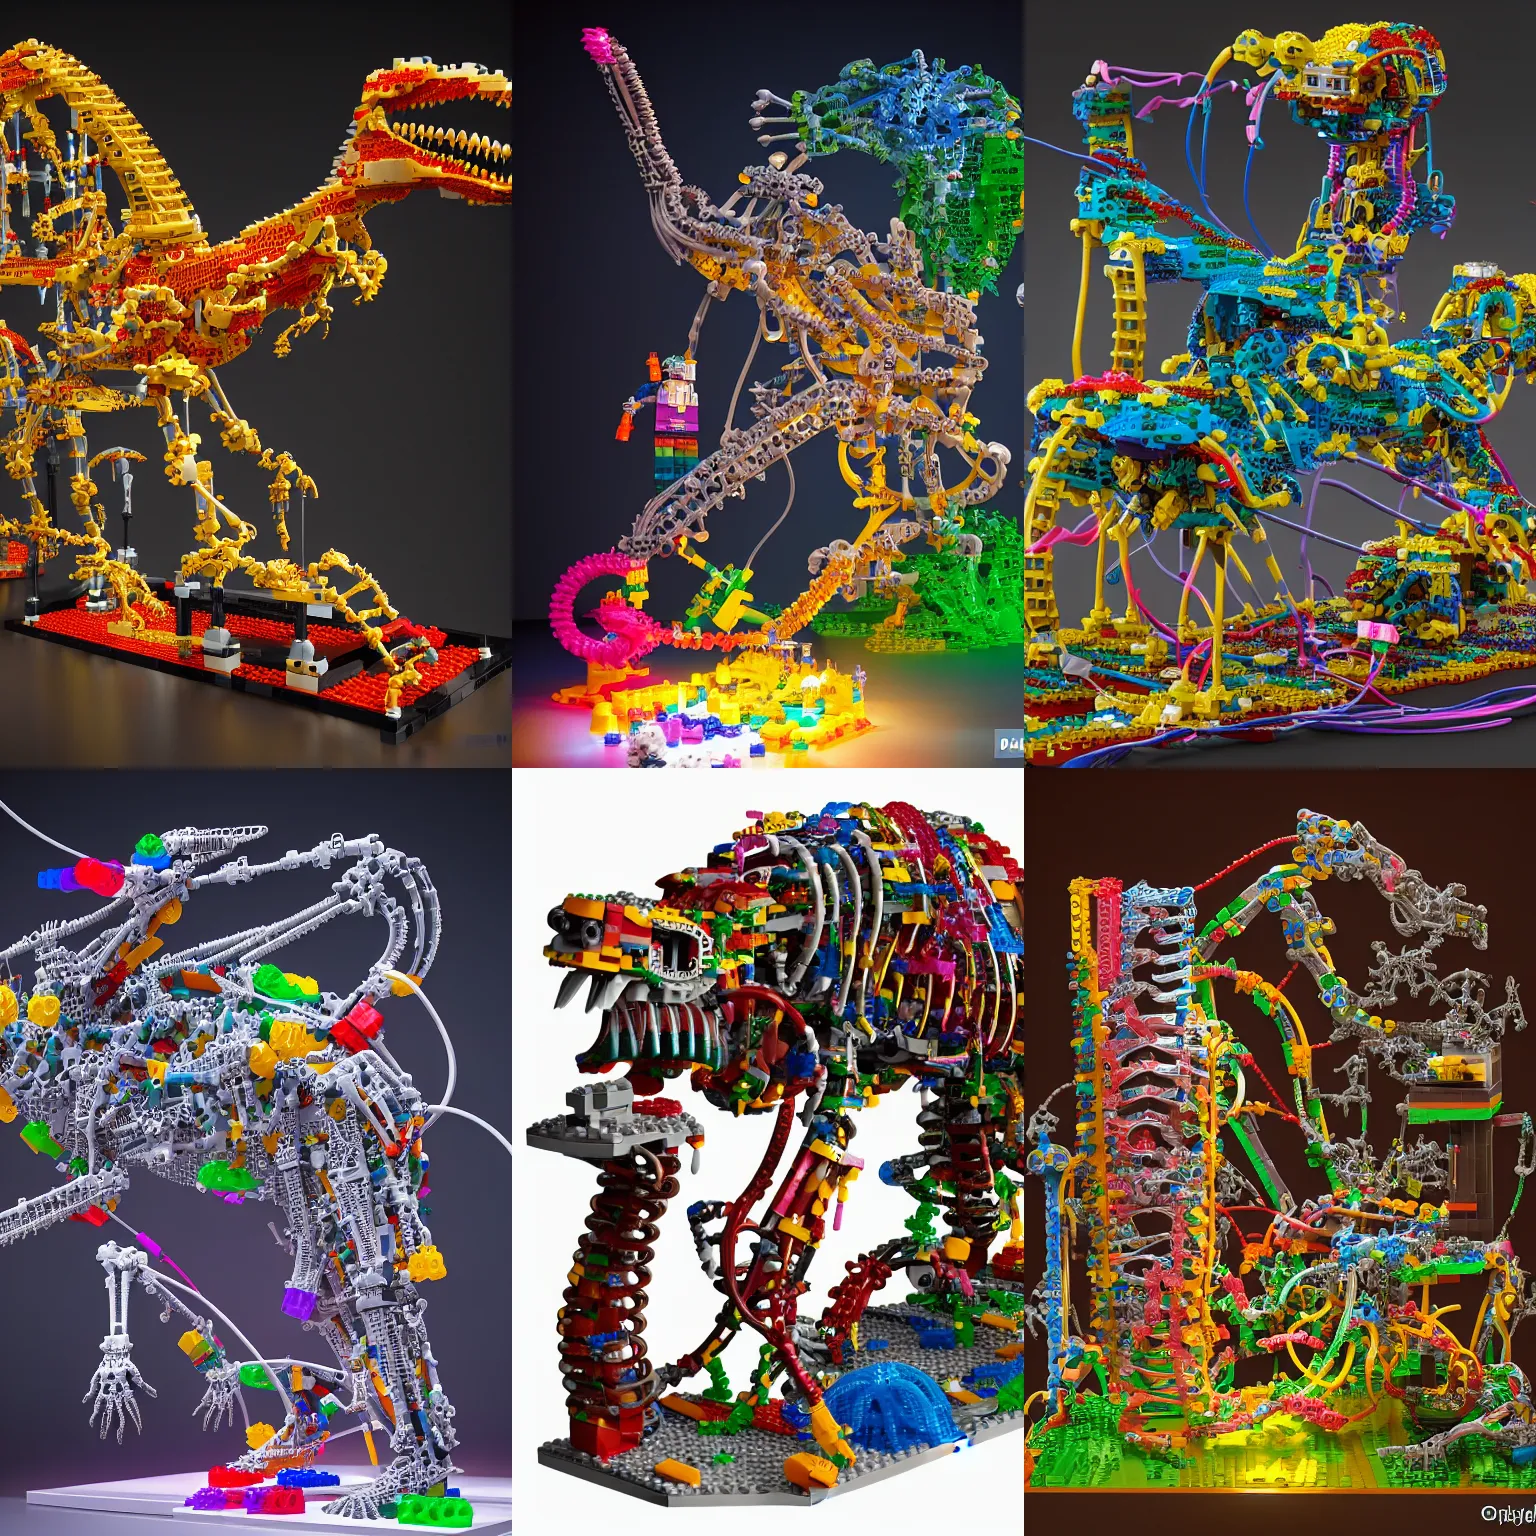 Prompt: electron microscopy Simple translucent mechanic bionic lego dinosaur skeleton dissection sculpture made from rollercoaster, with colorfull jellybeans organs, cables, wires and tubes, by david lachapelle, by angus mckie, by rhads, in a dark empty black studio hollow, c4d, at night, rimlight, rimight, rimlight